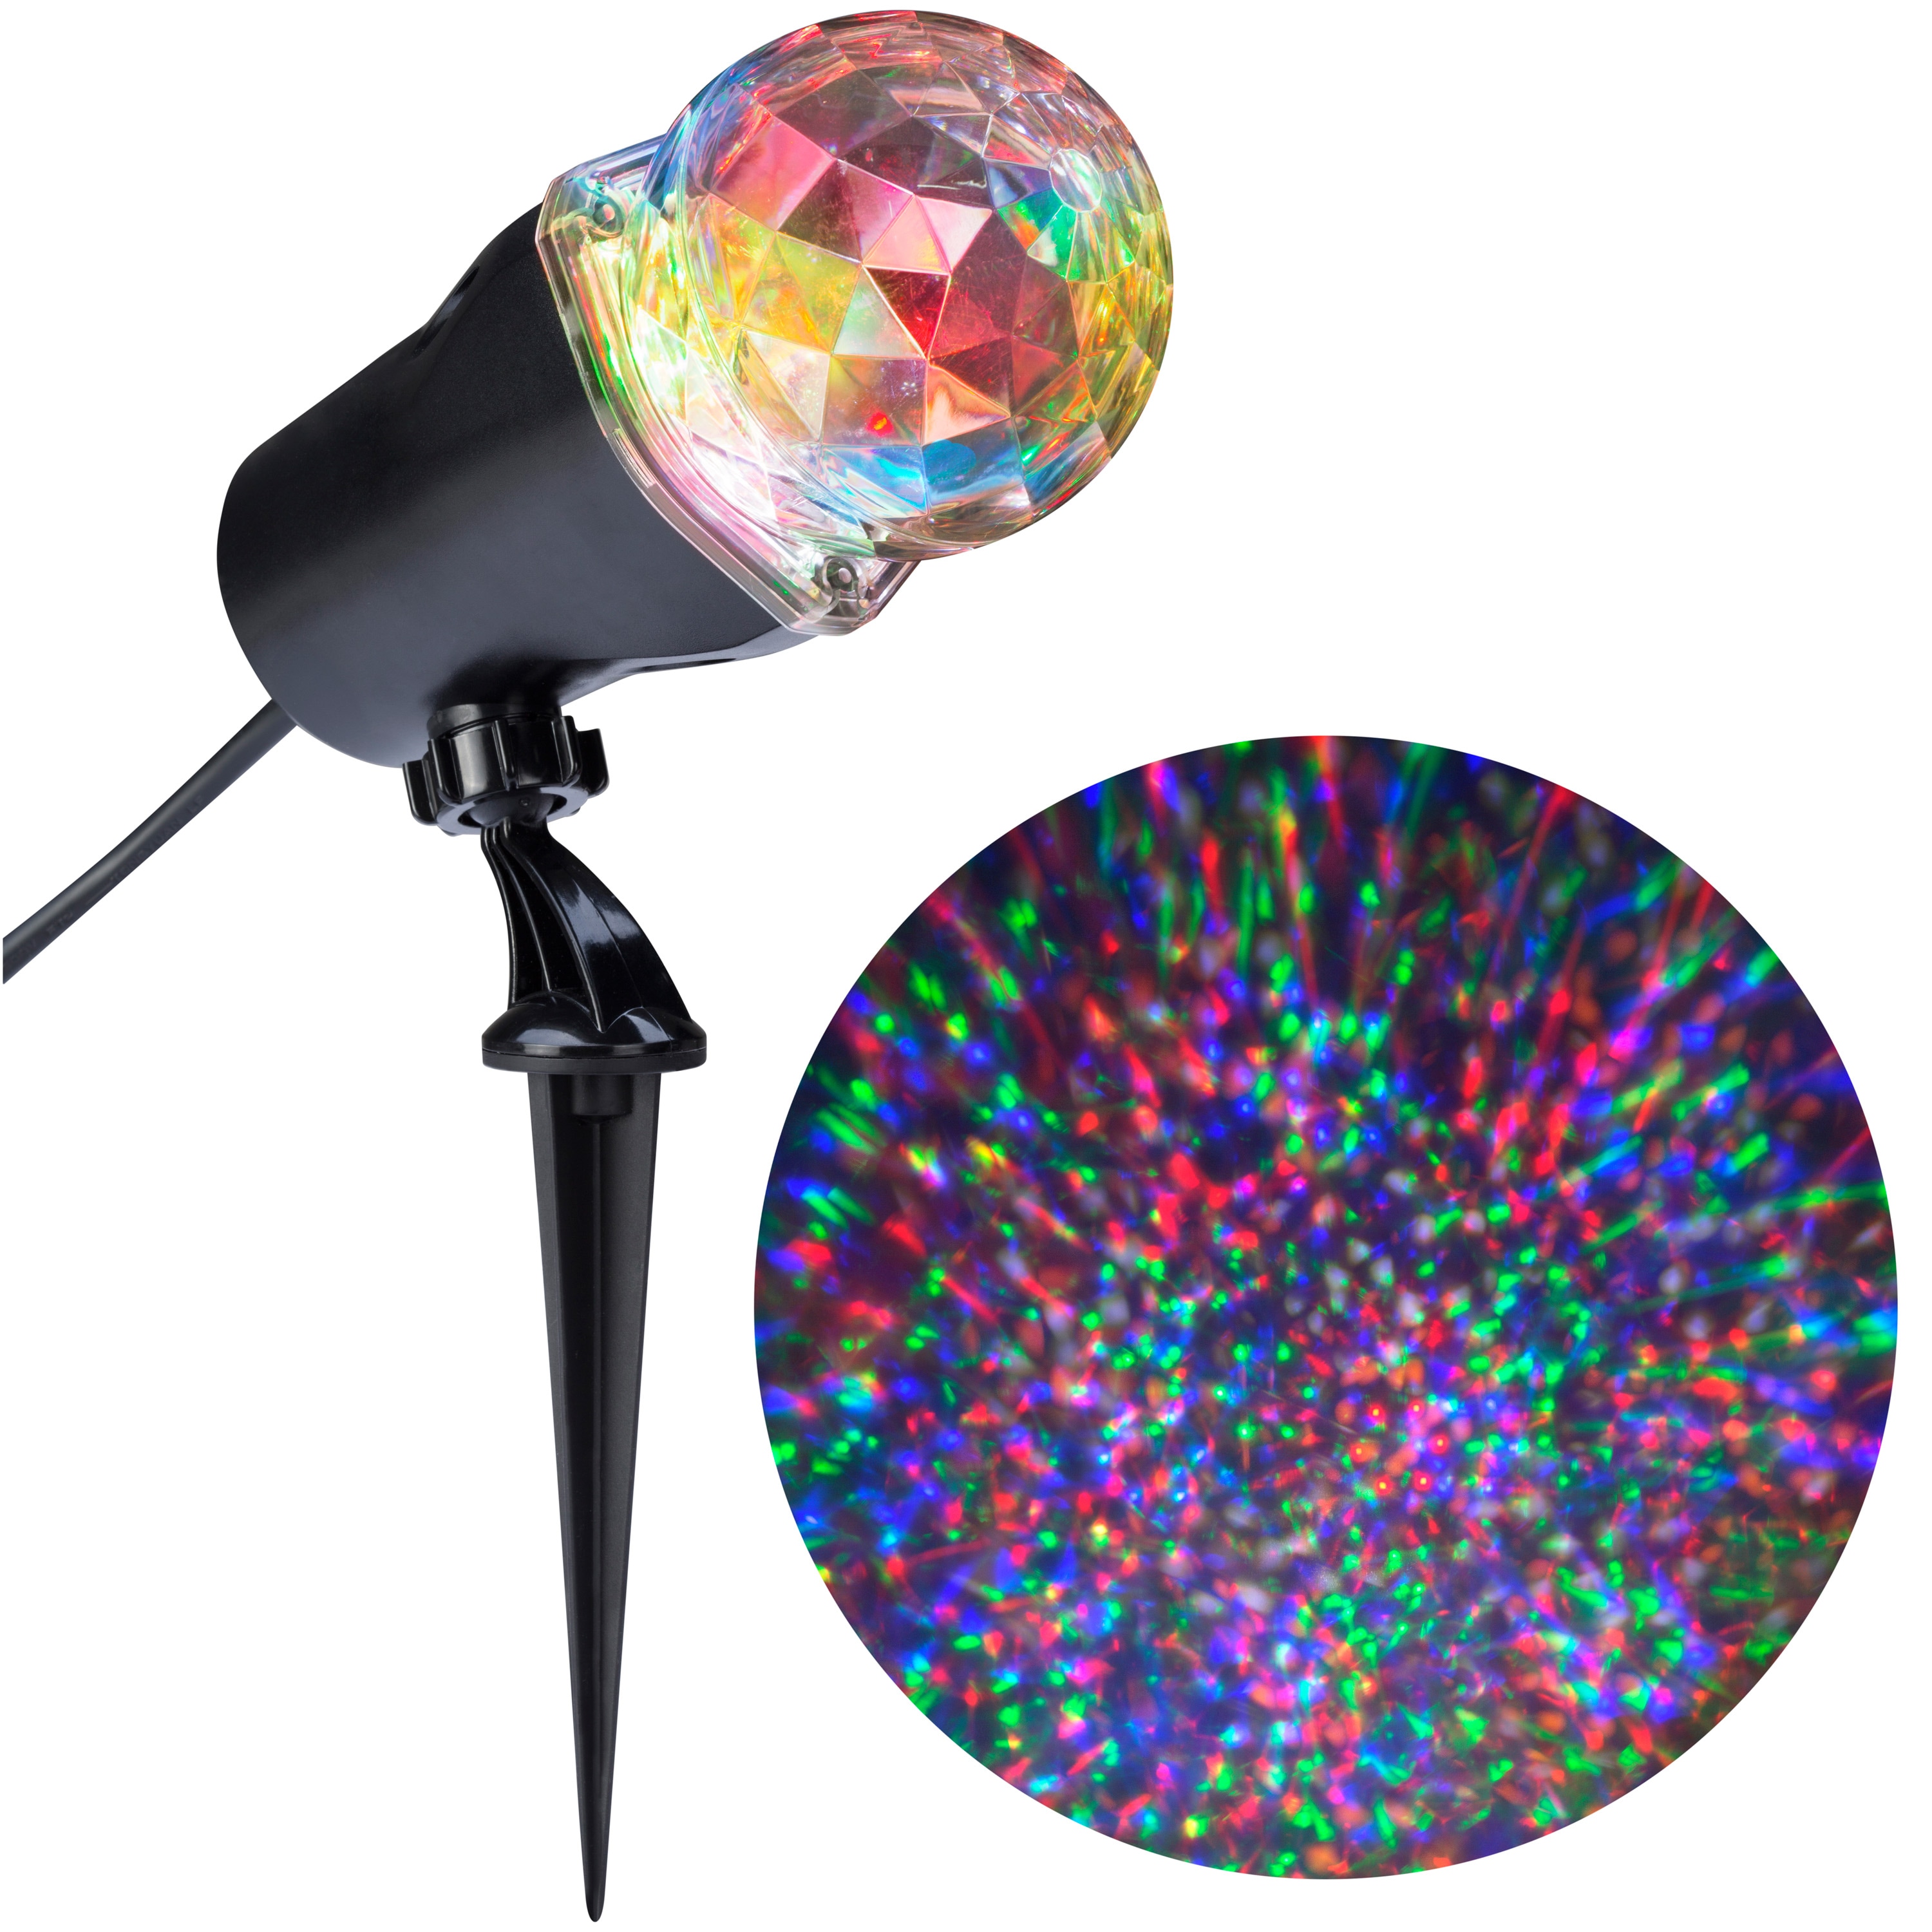 LightShow Projection Multi-function Multicolor LED Kaleidoscope Christmas 